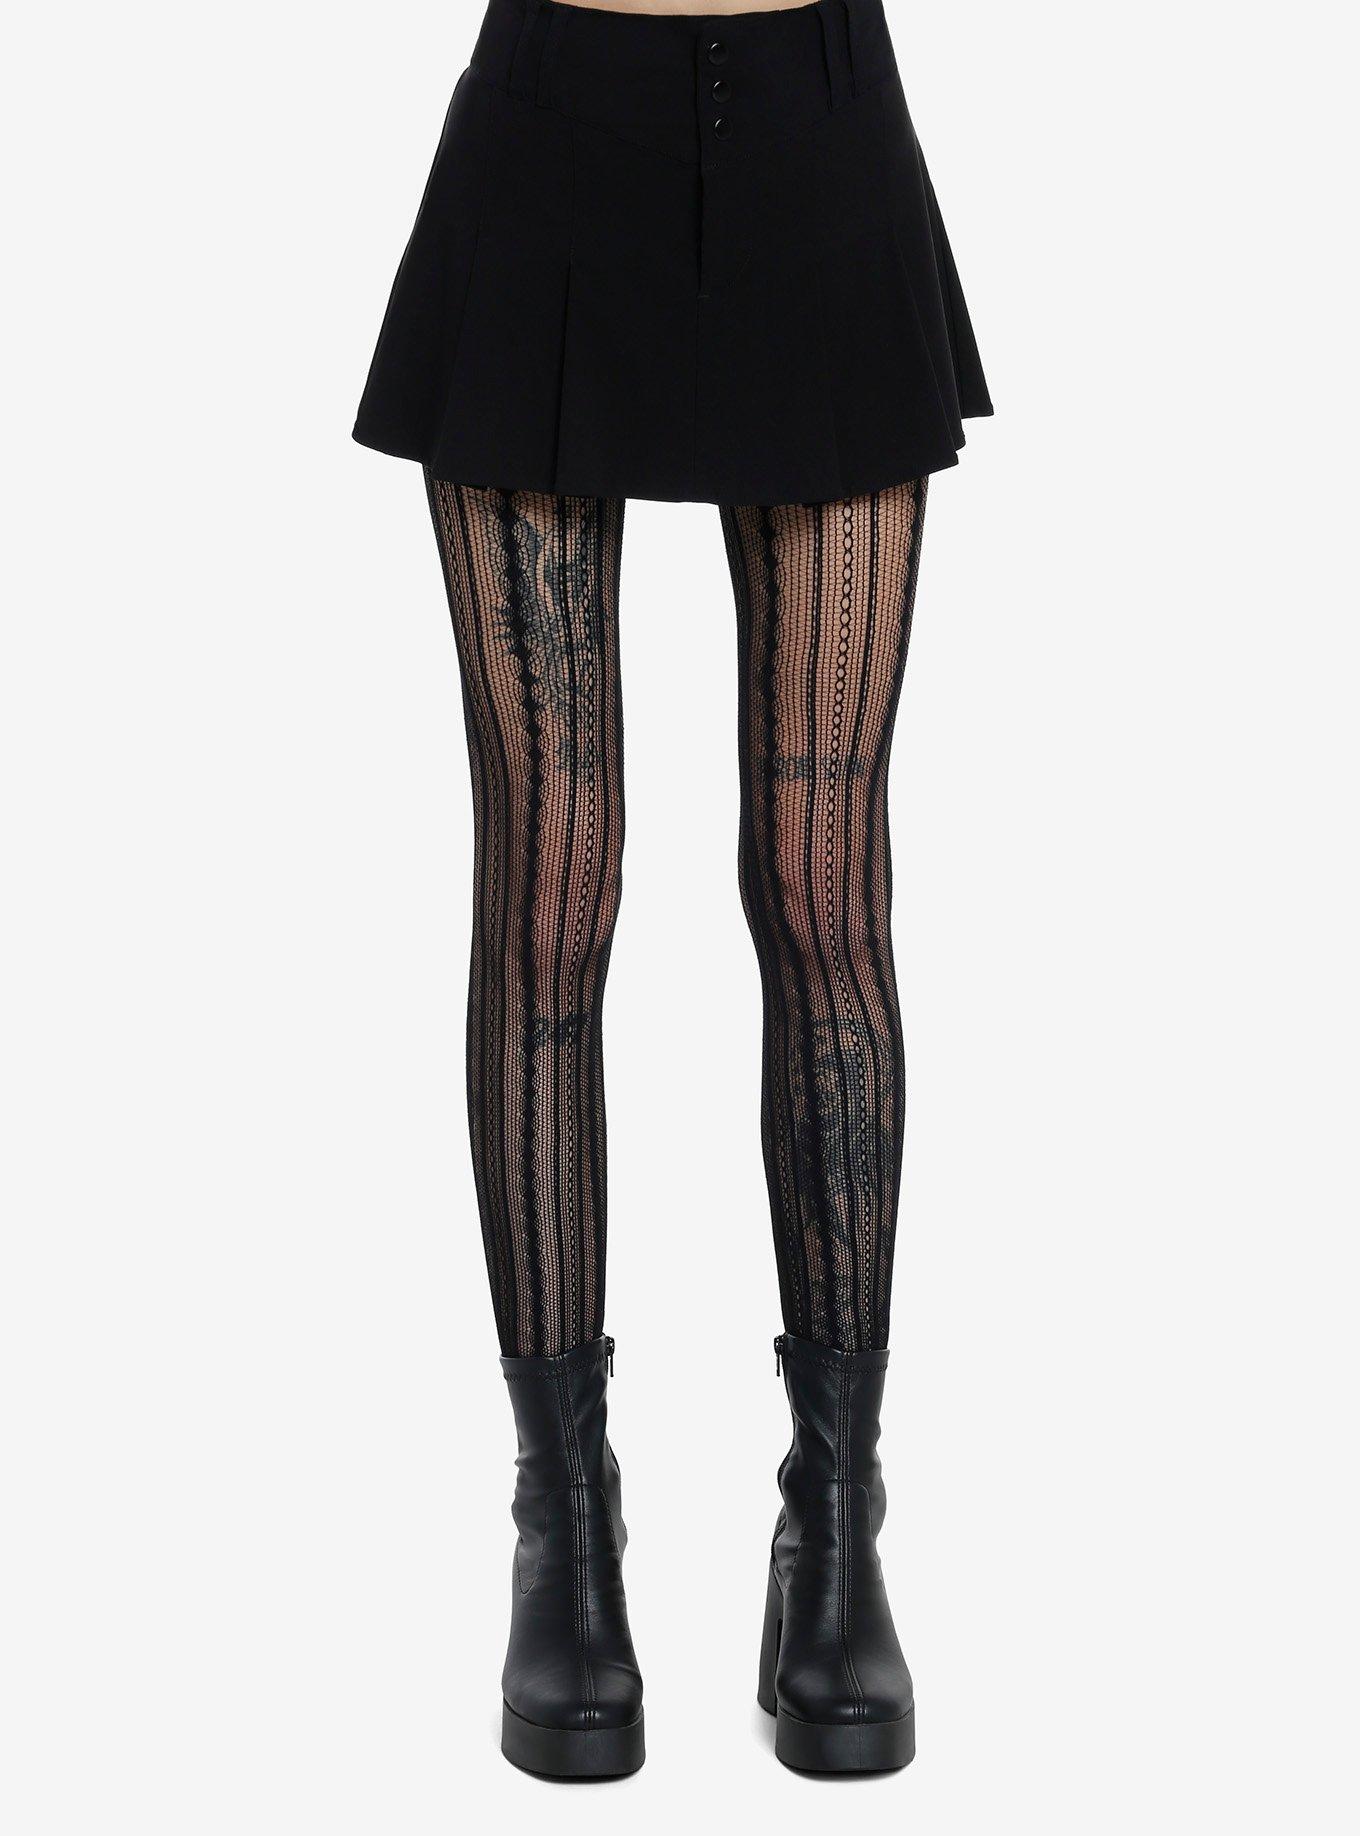 Vintage Pinstripe Net Tights | Hot Topic